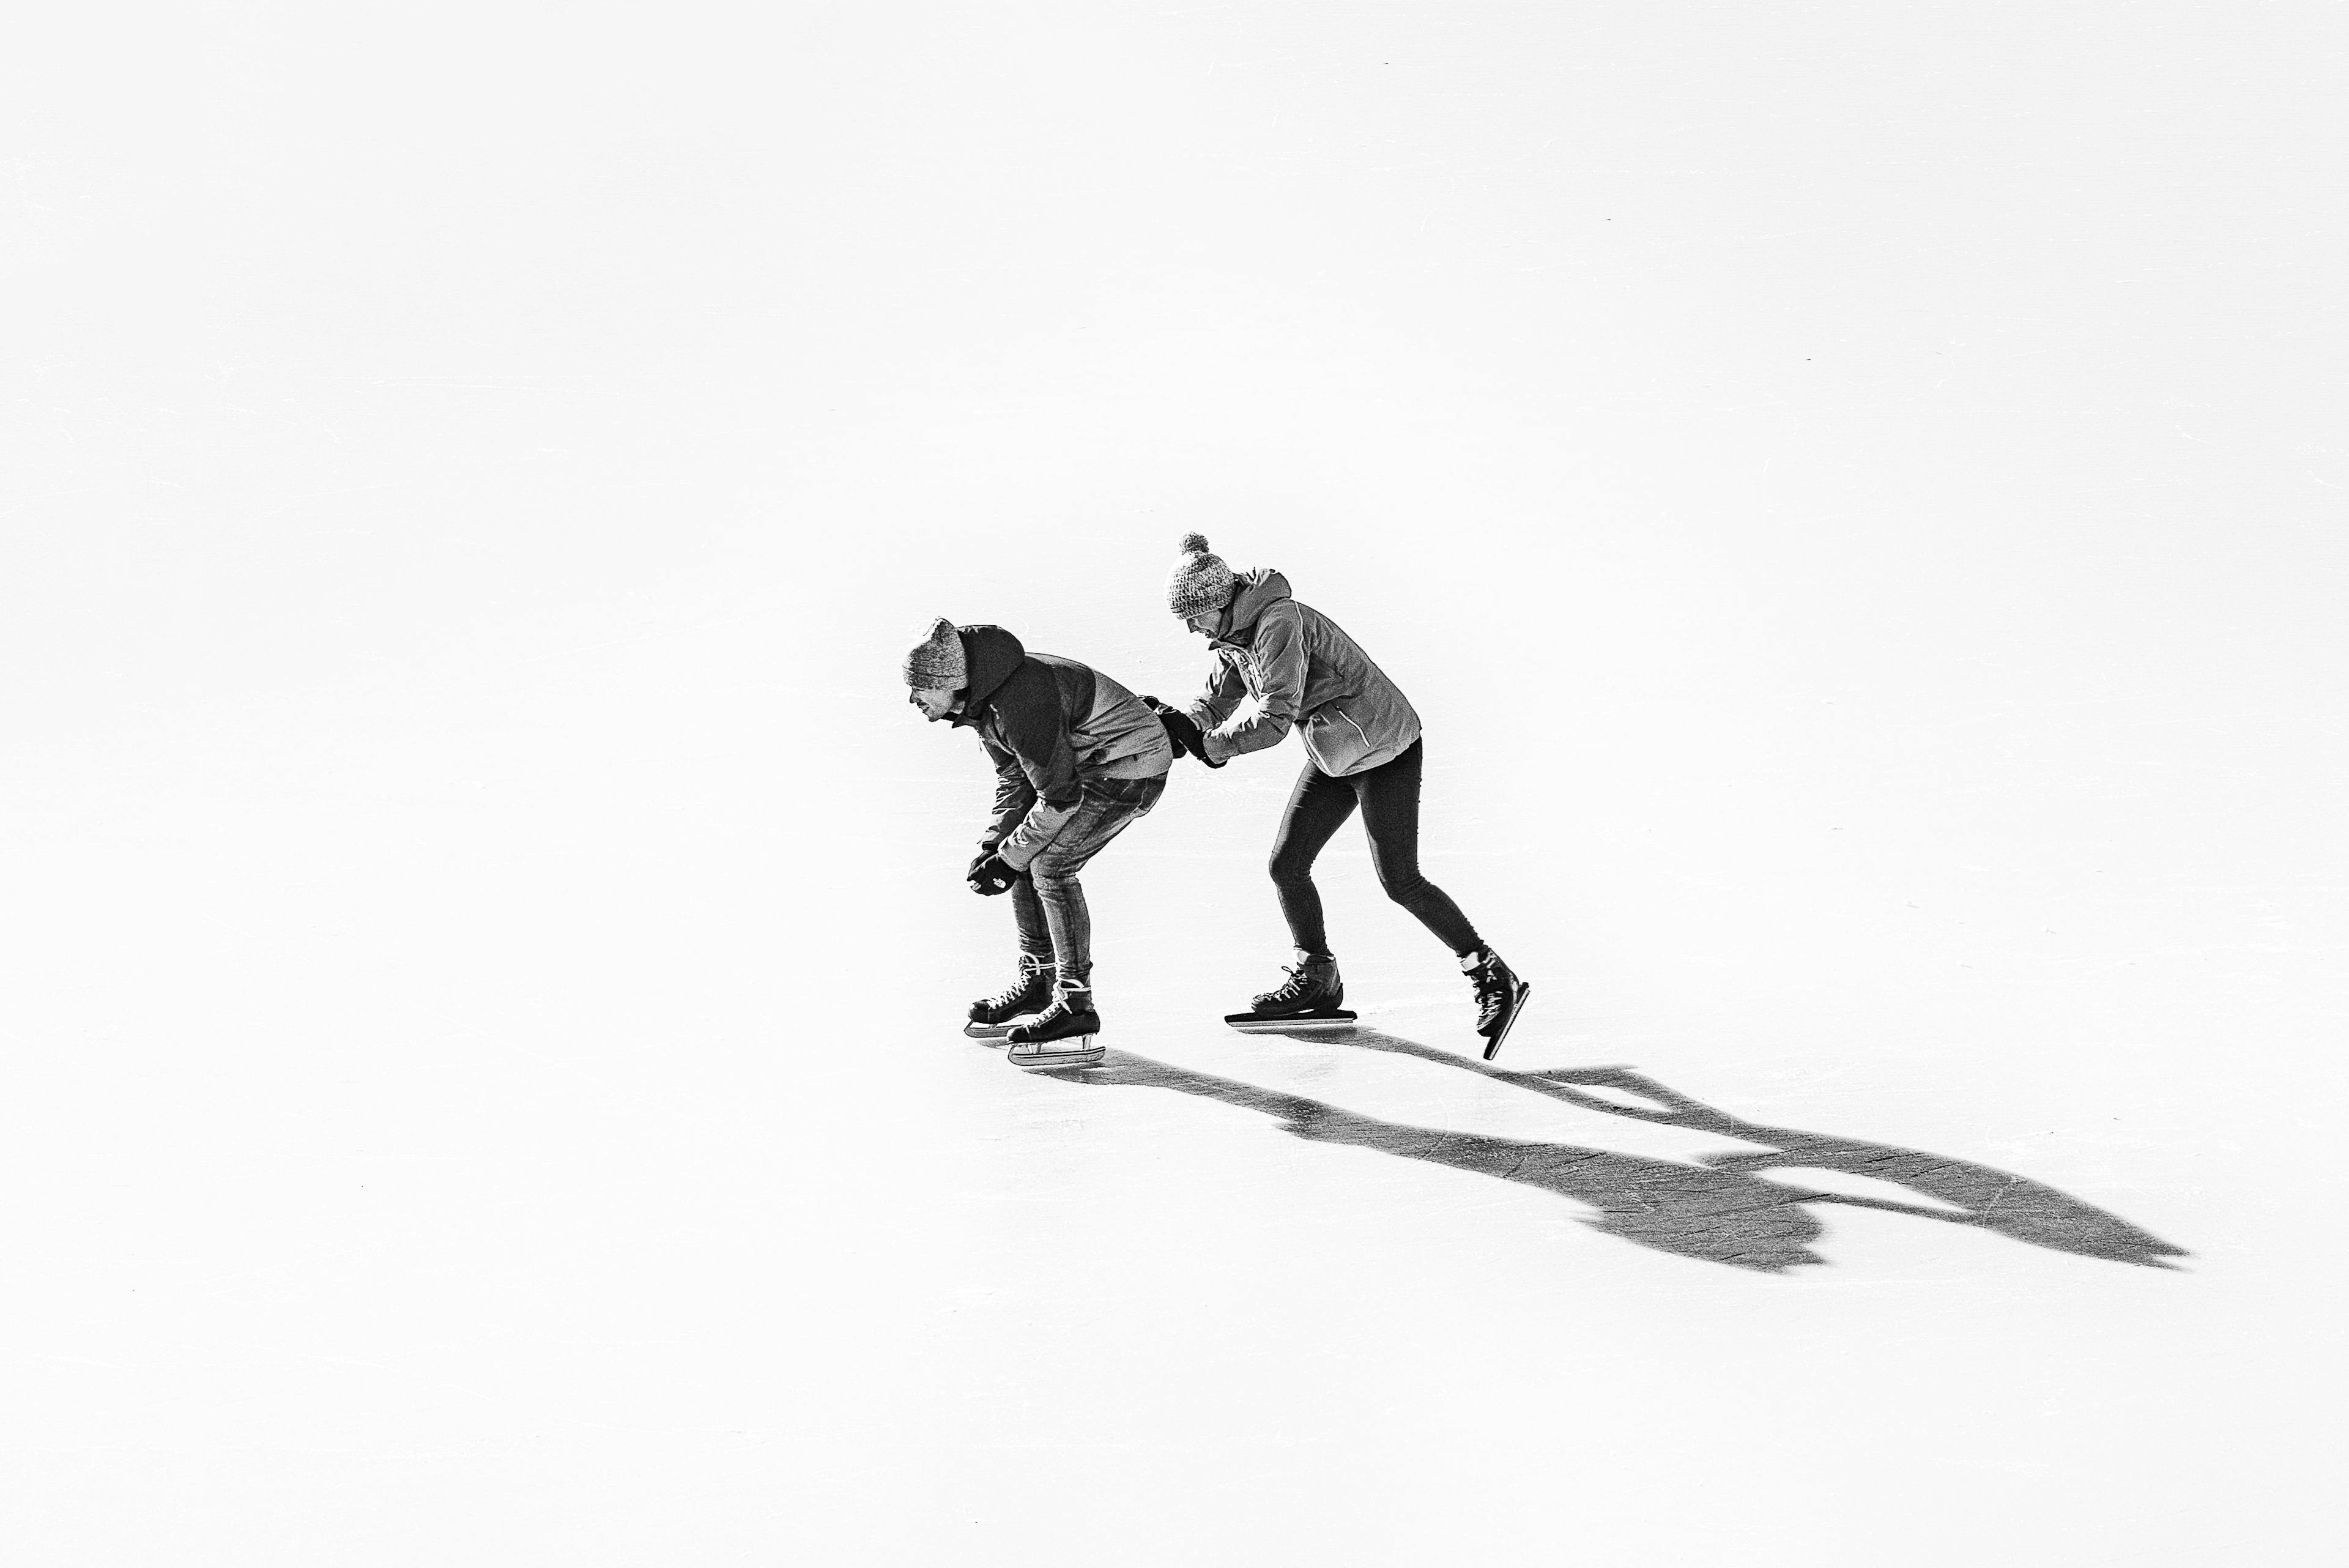 Couple ice skating together in Austria